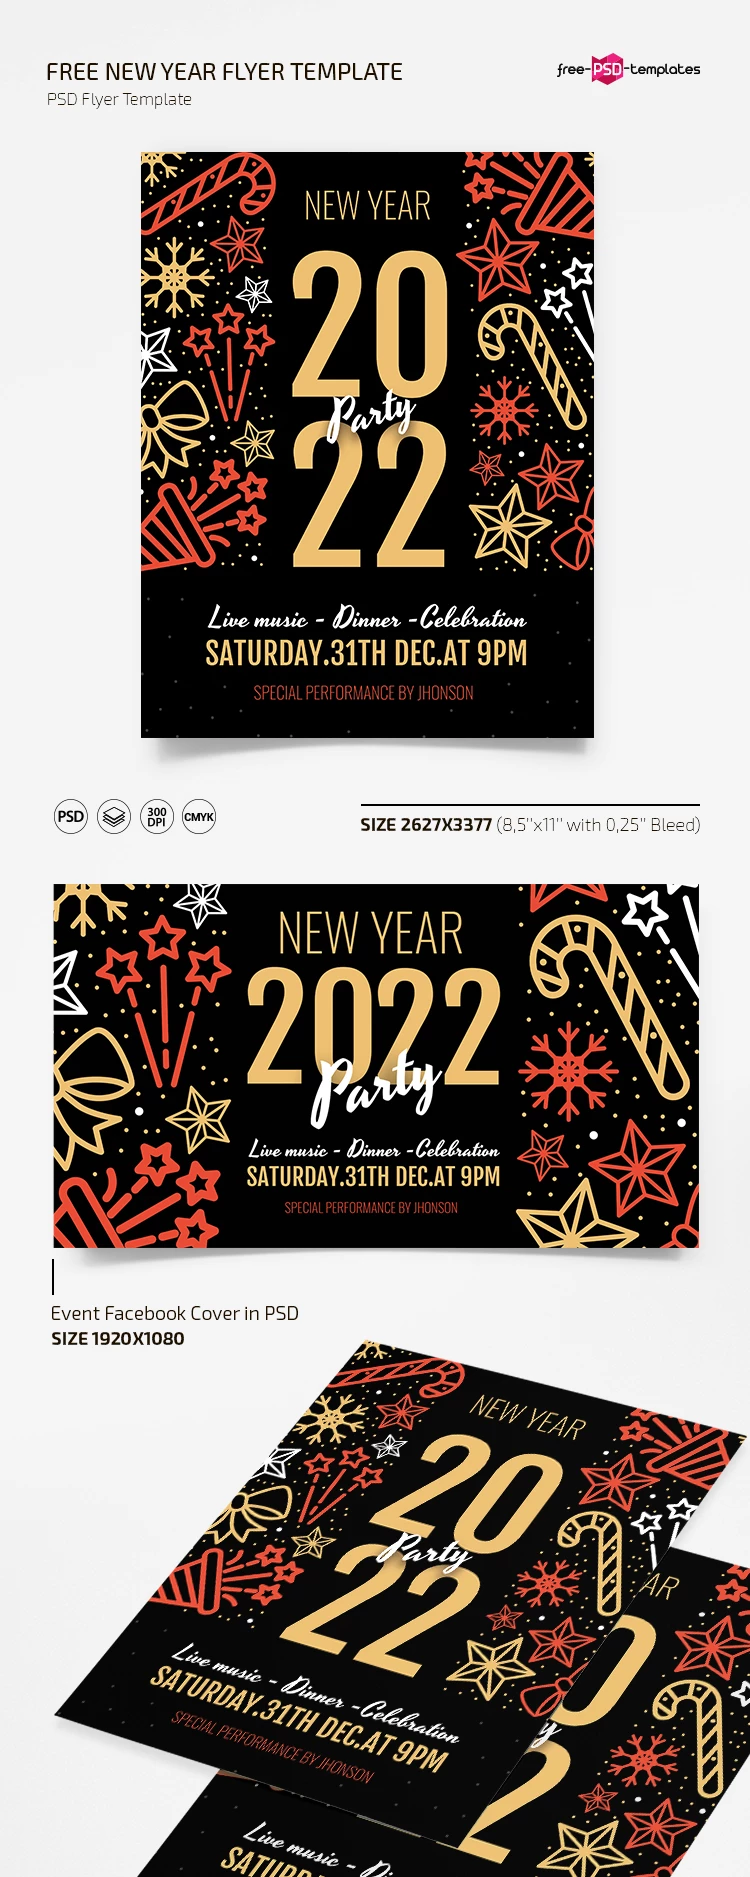 Free New Year Flyer Template